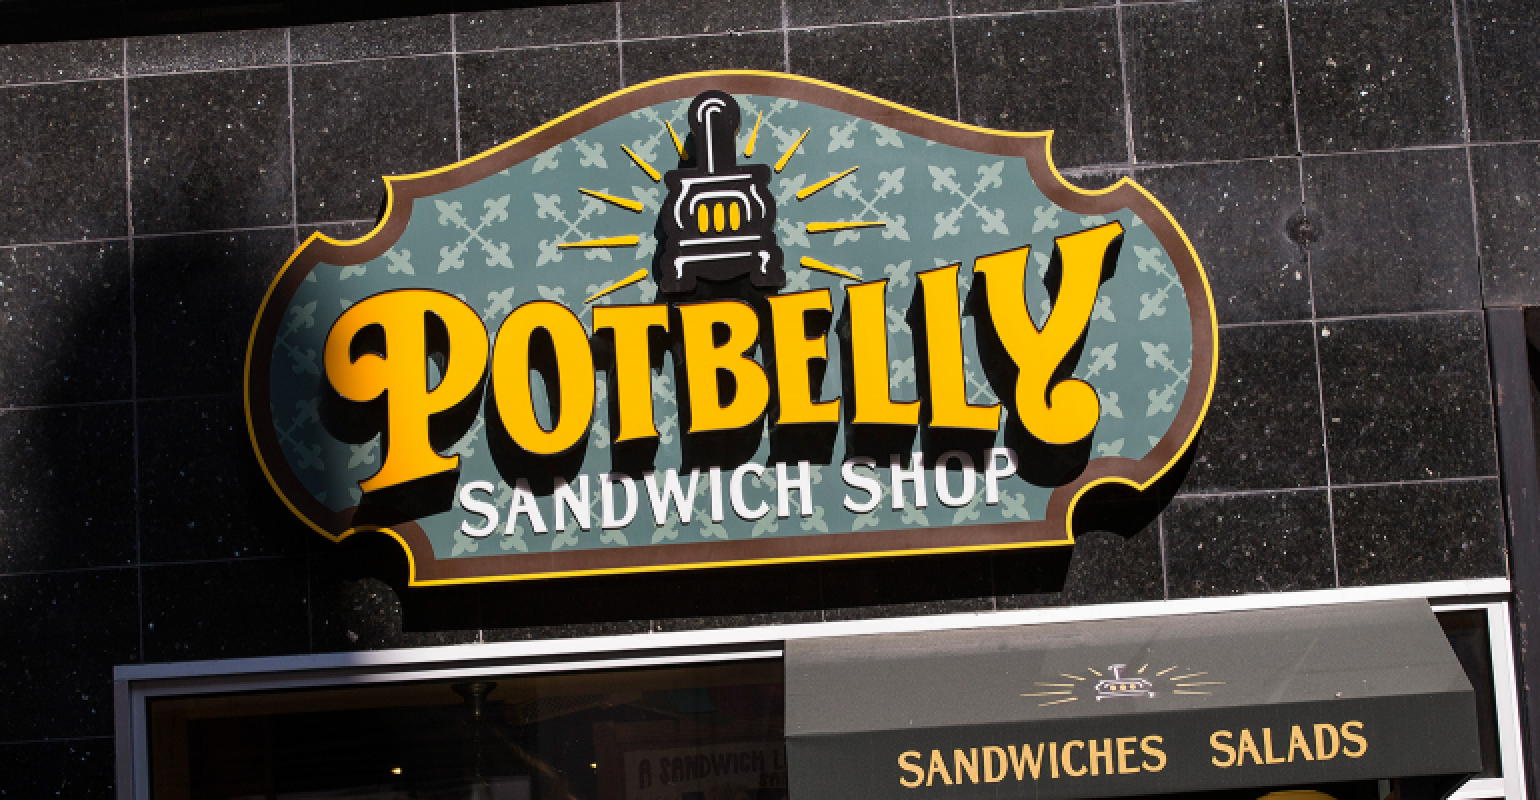 How Potbelly is growing market share and gaining traffic